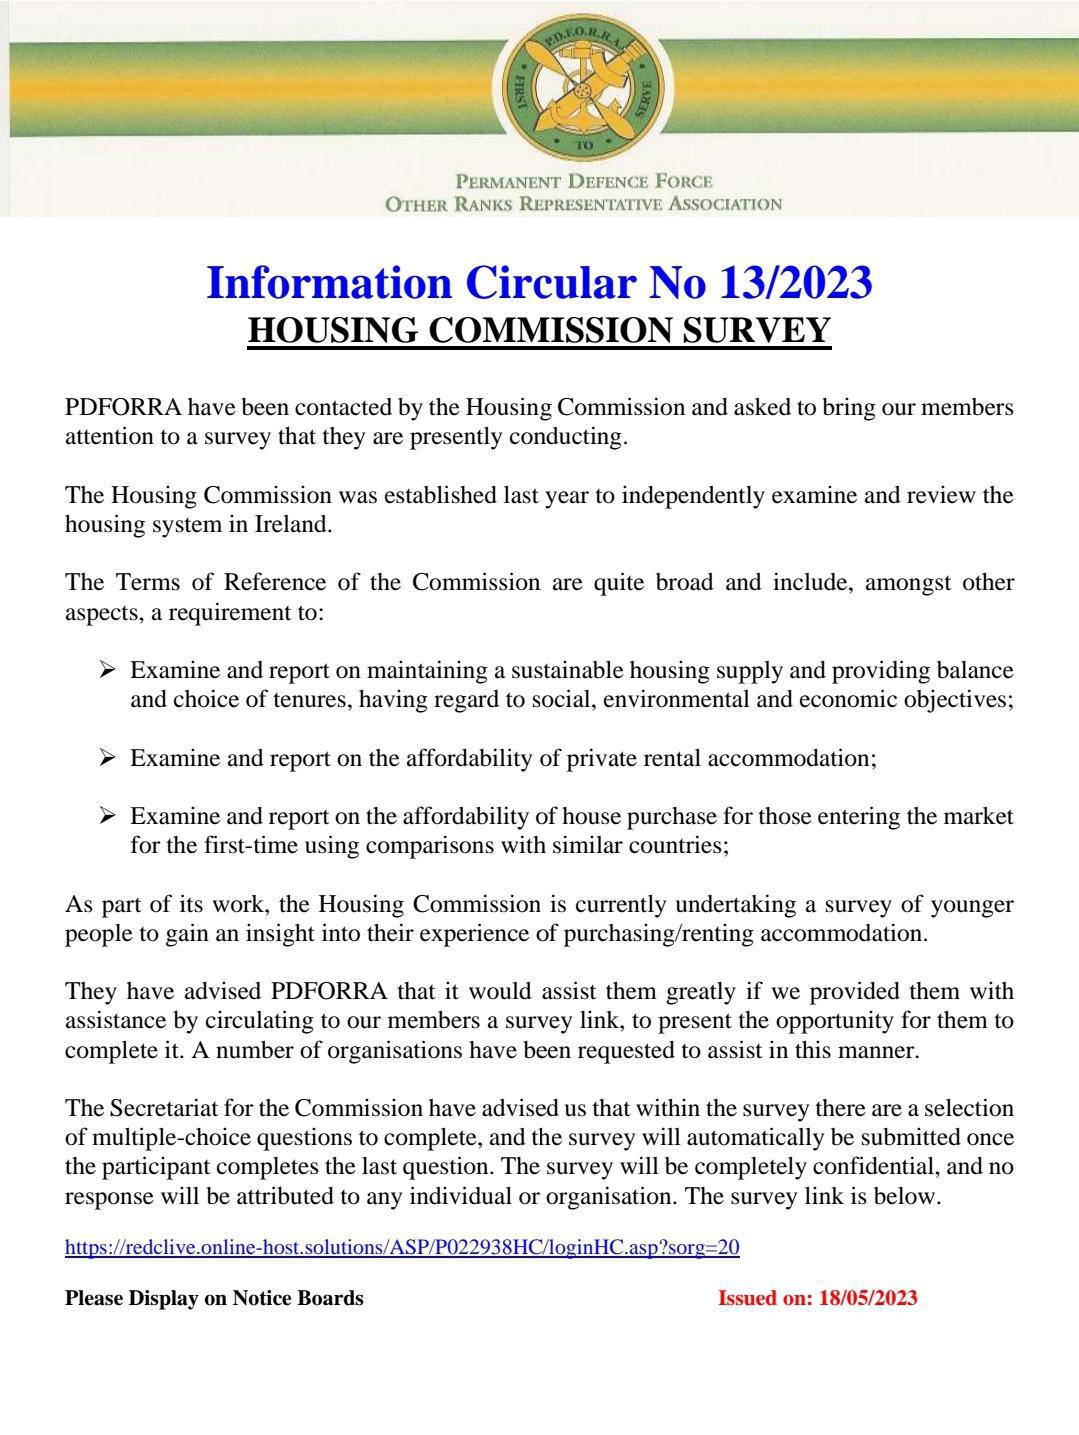 Information Circular No 13 of 23 - Housing Commission Survey